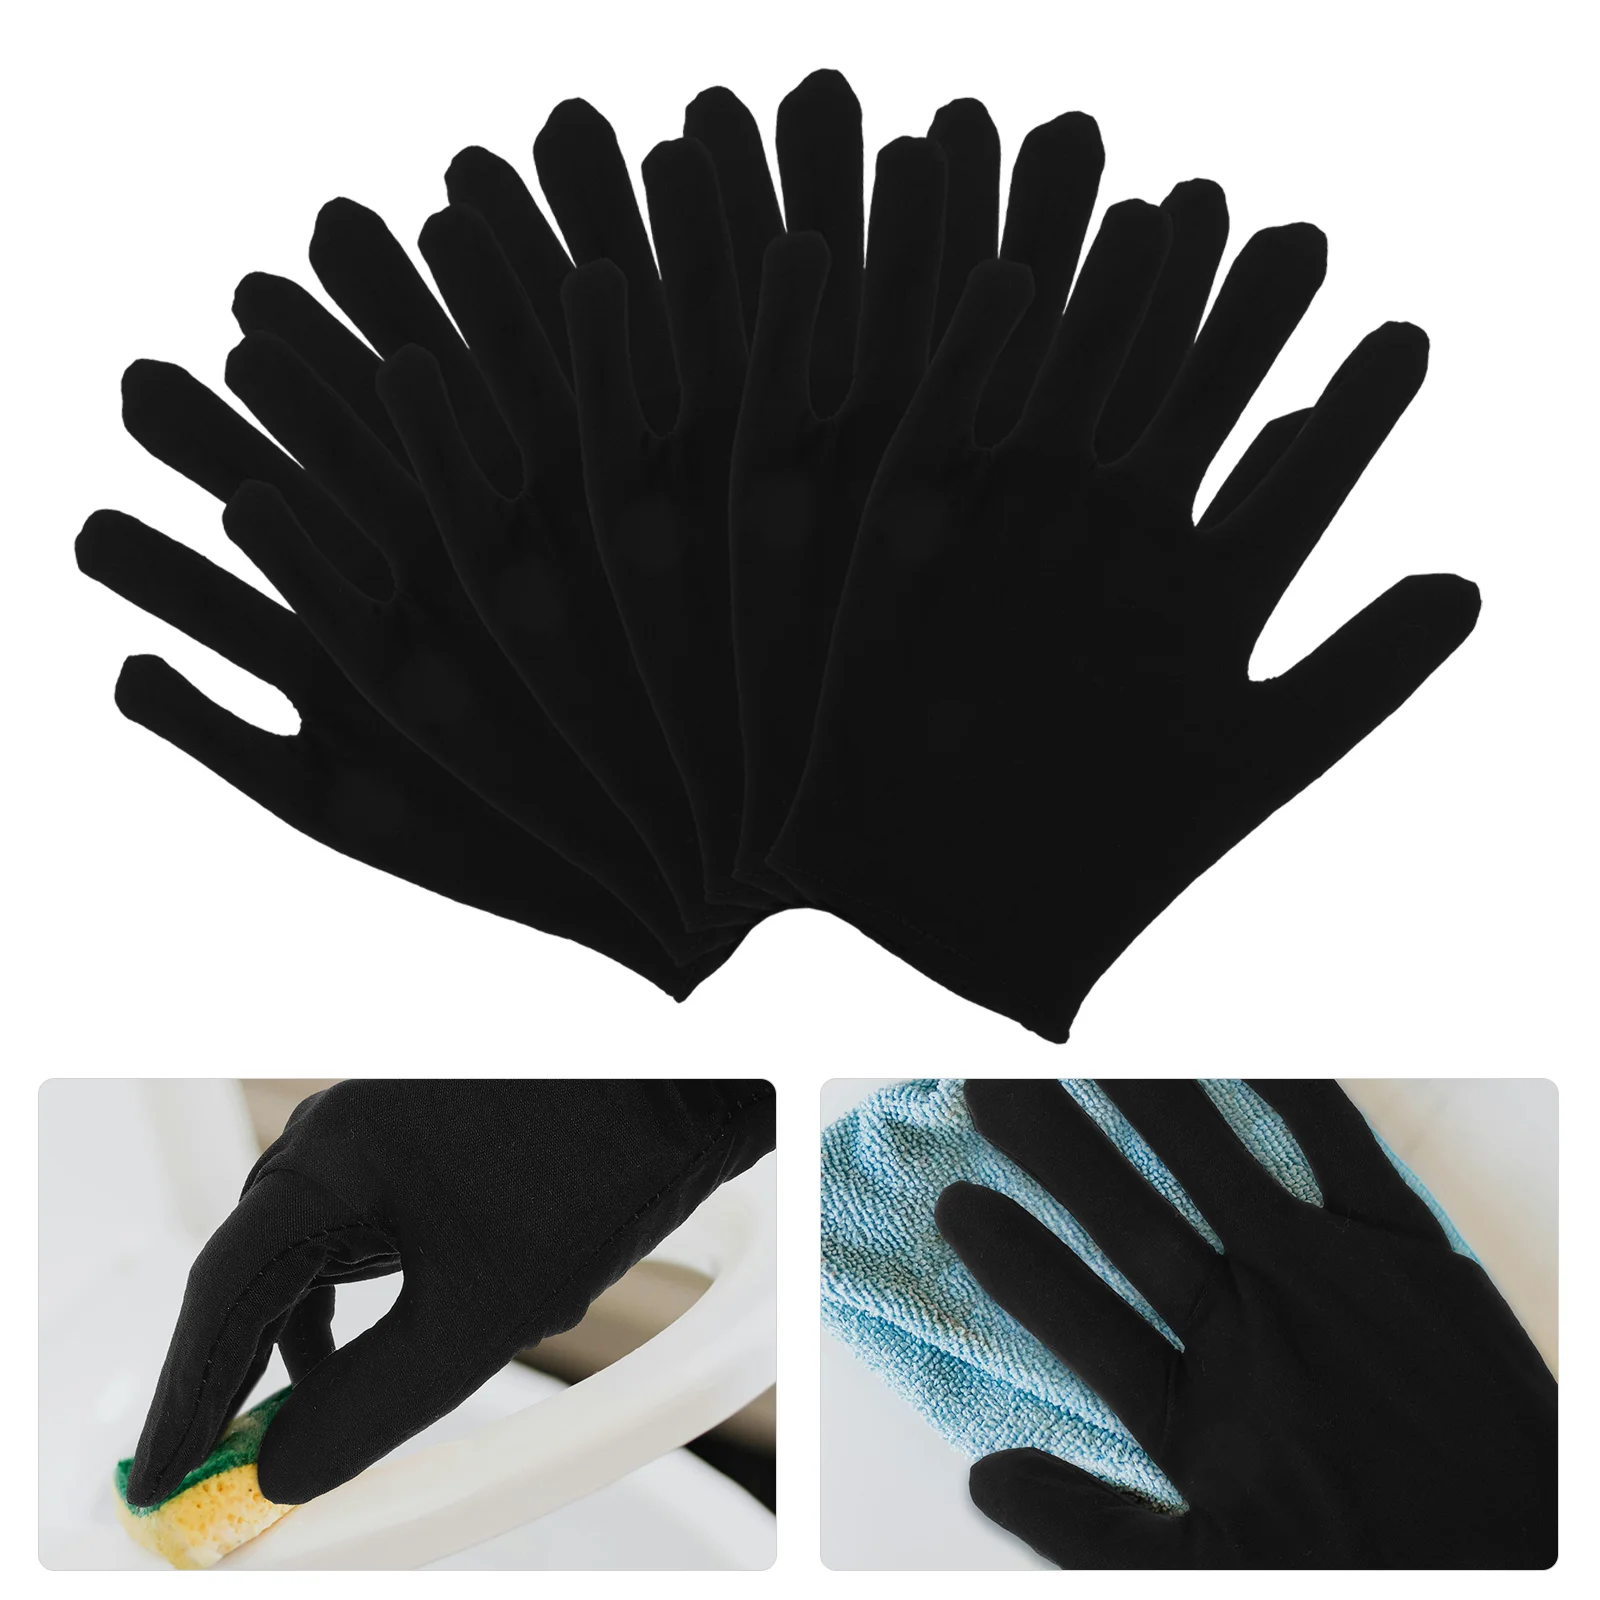 

12 Pairs Moisturizing Riding Fishing Medical Black Fingerless Gloves Industrial Running for Men Cotton Protective Riding Warm